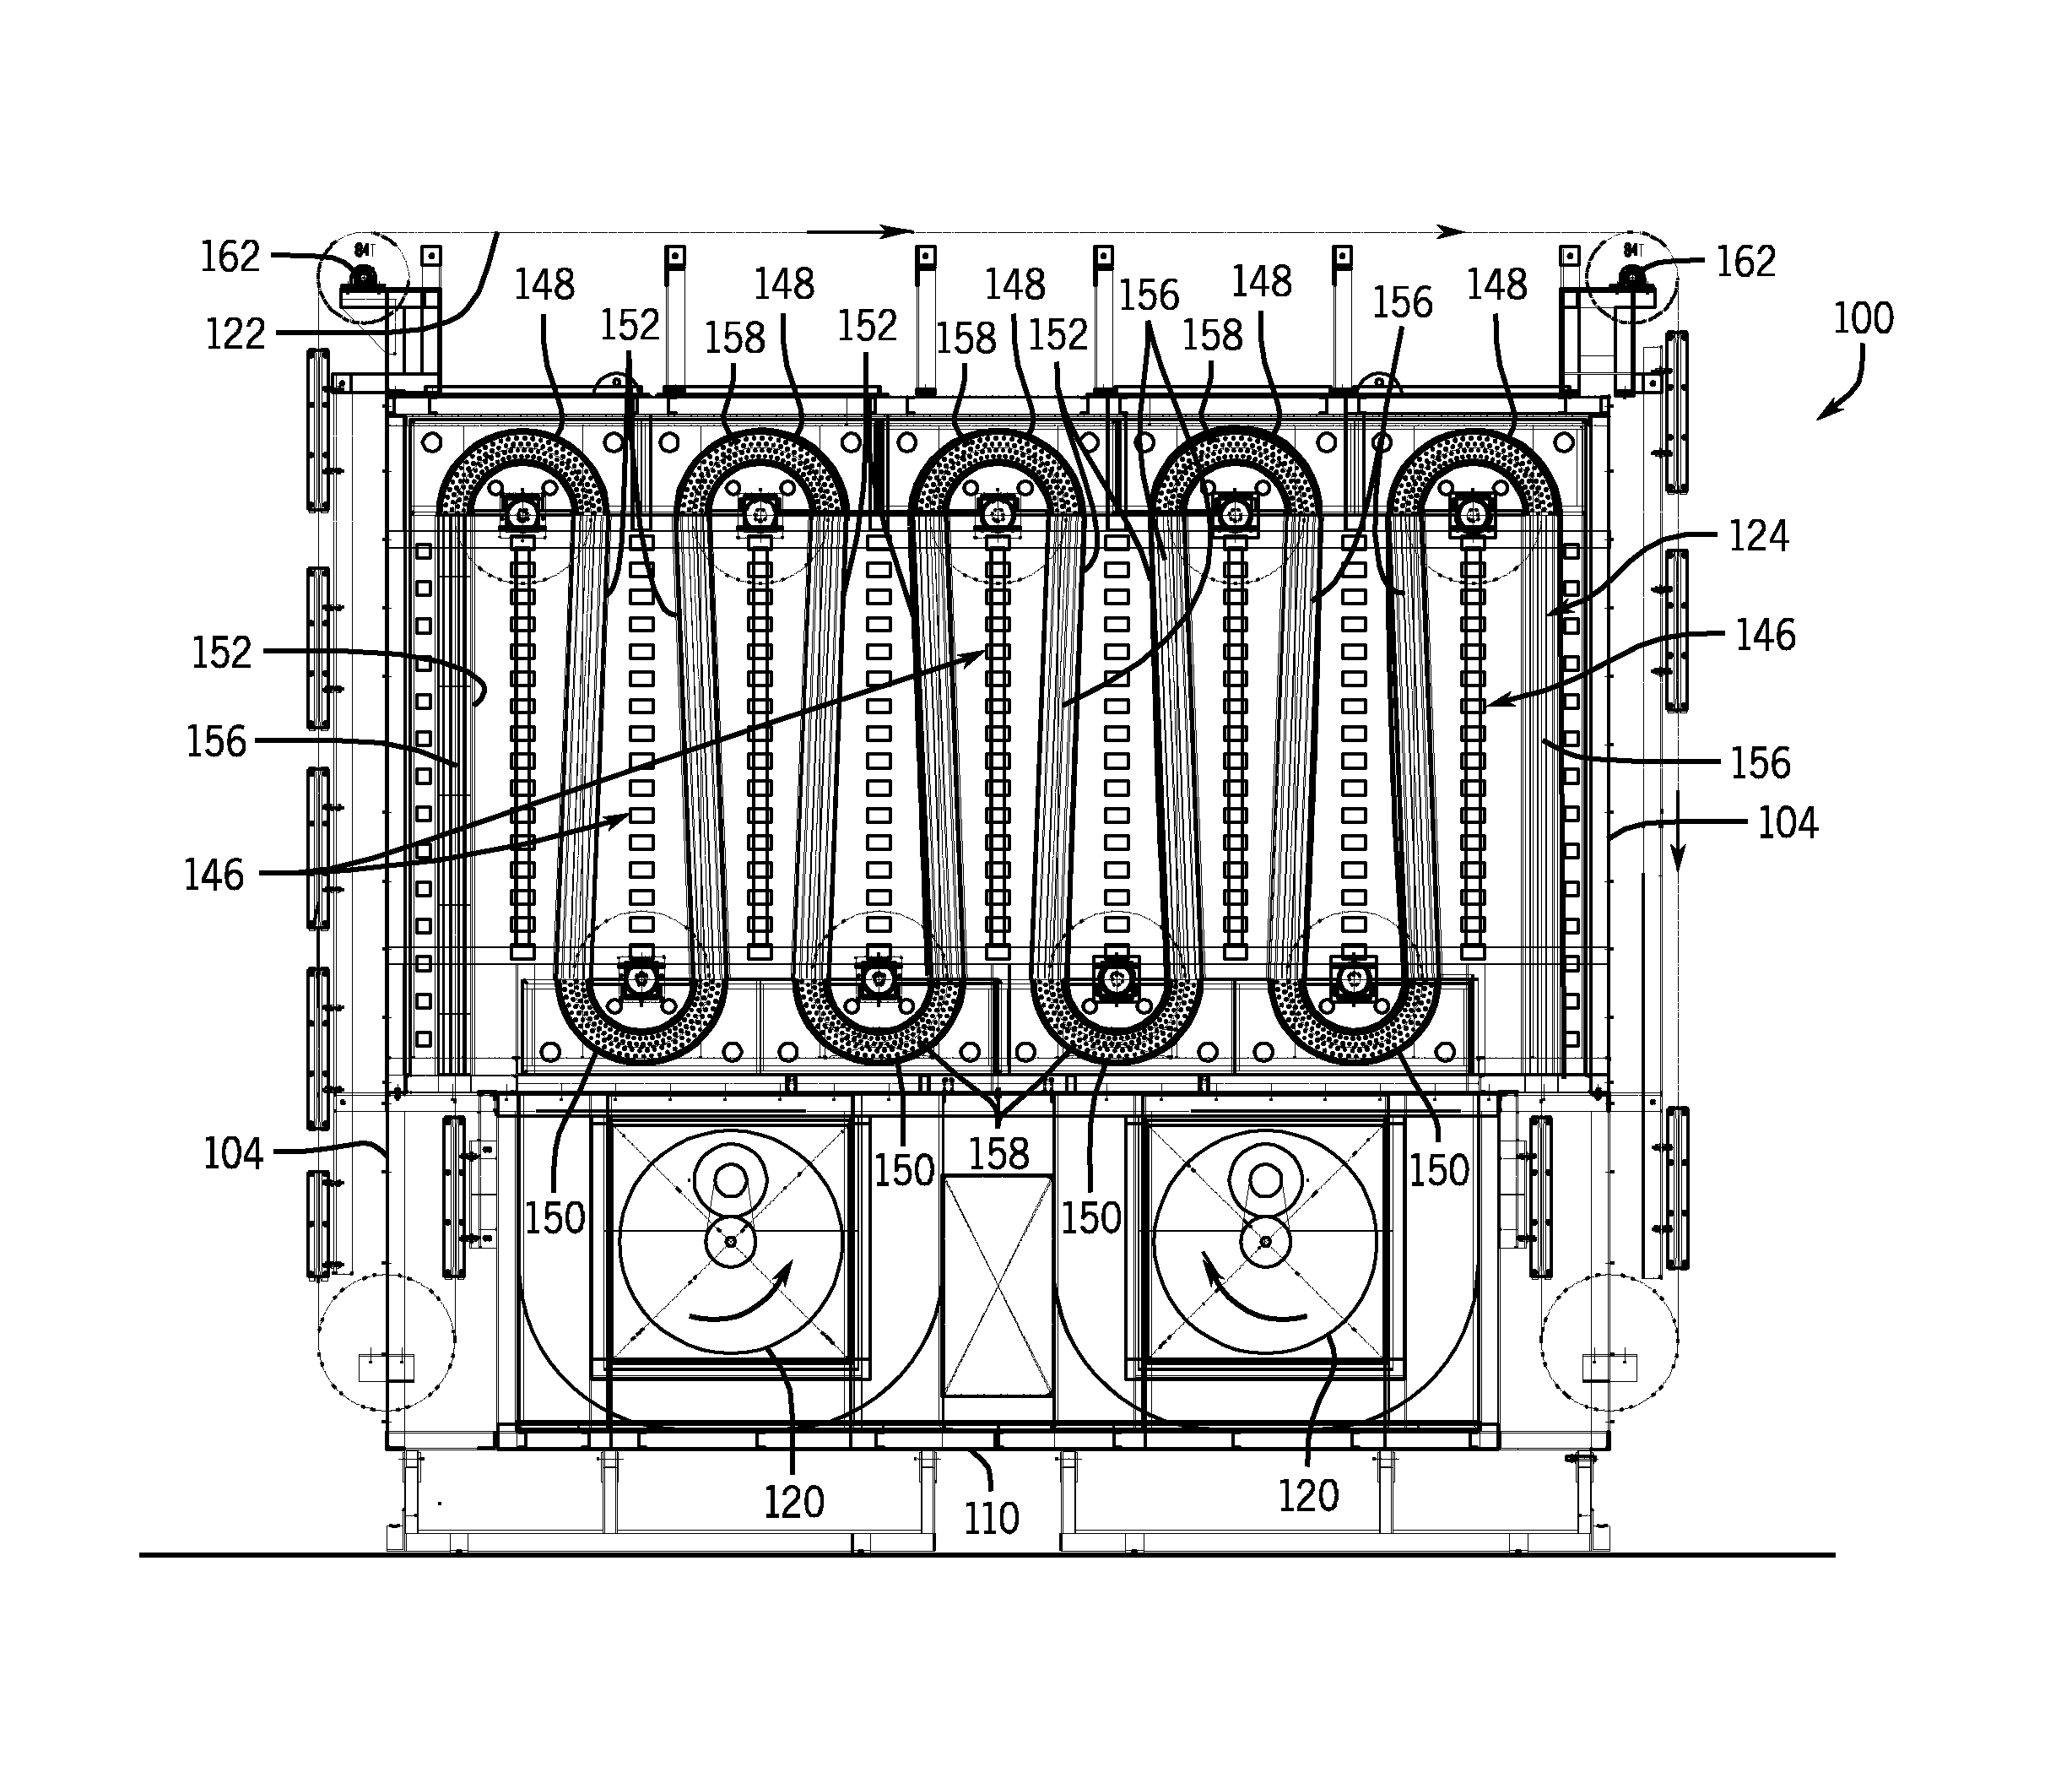 Pin Oven with a Continuous U-Shaped Duct